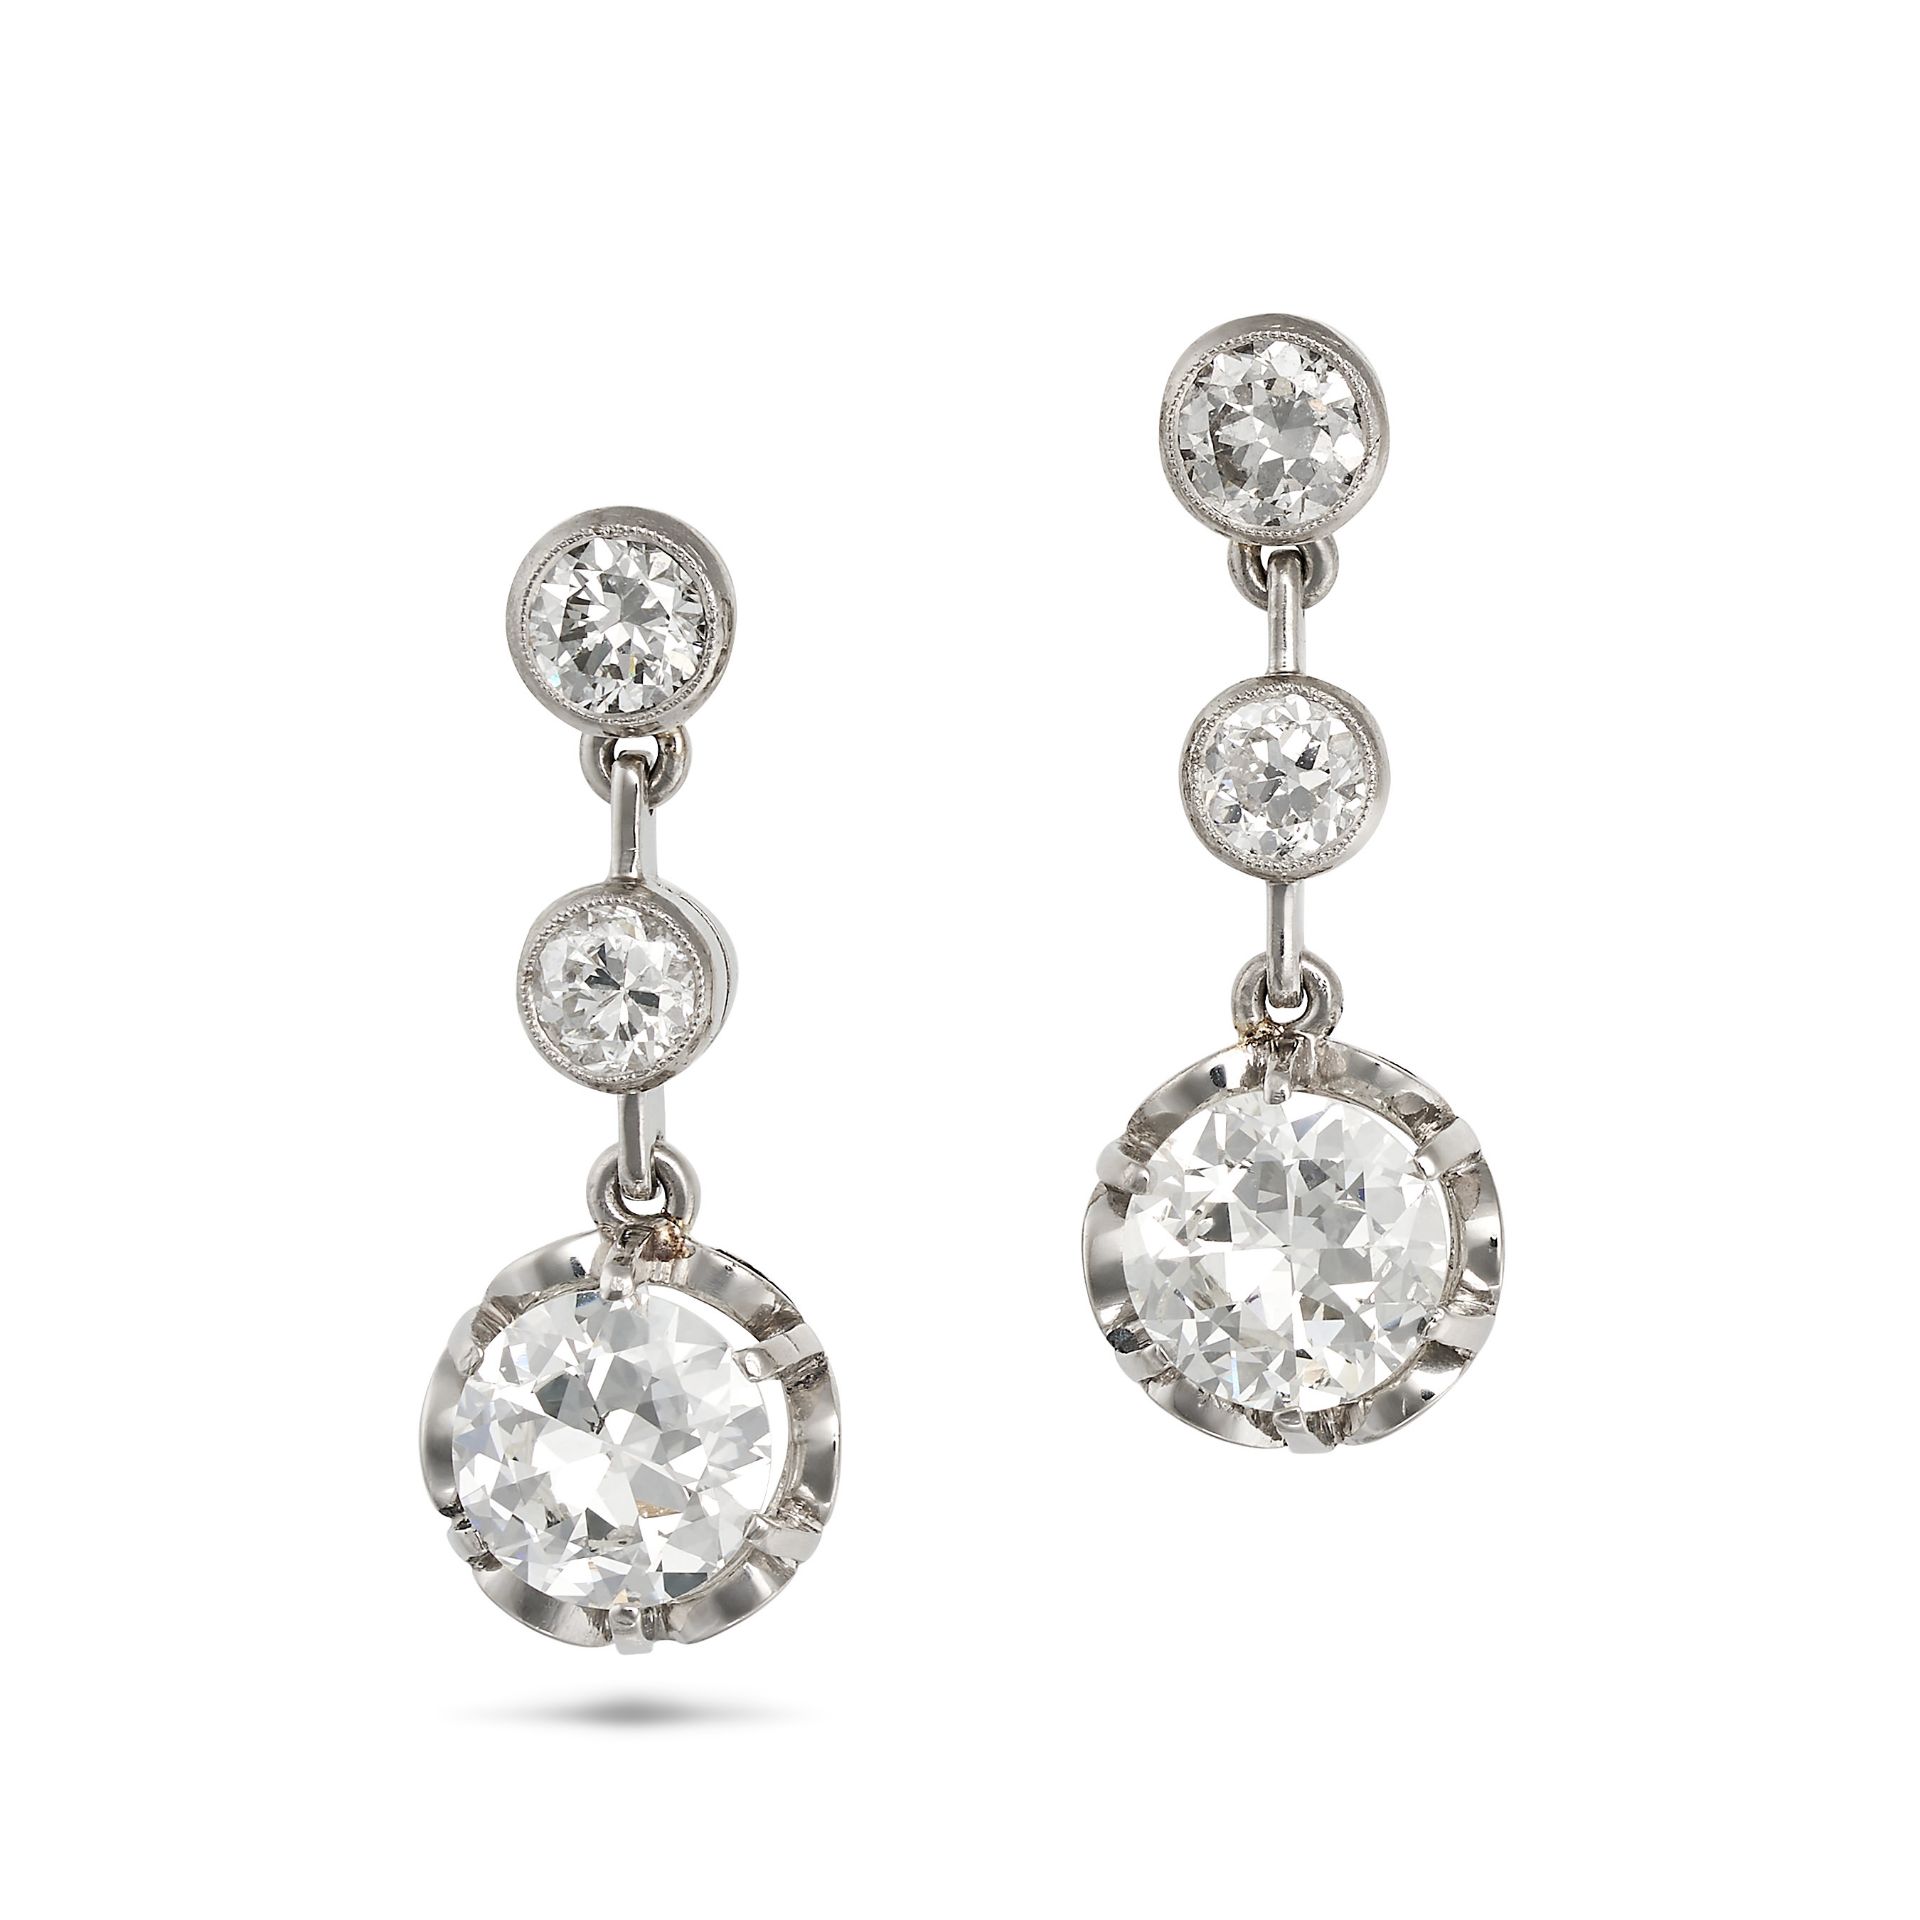 A PAIR OF ANTIQUE ART DECO DIAMOND DROP EARRINGS in platinum and 18ct yellow gold, each set with ...